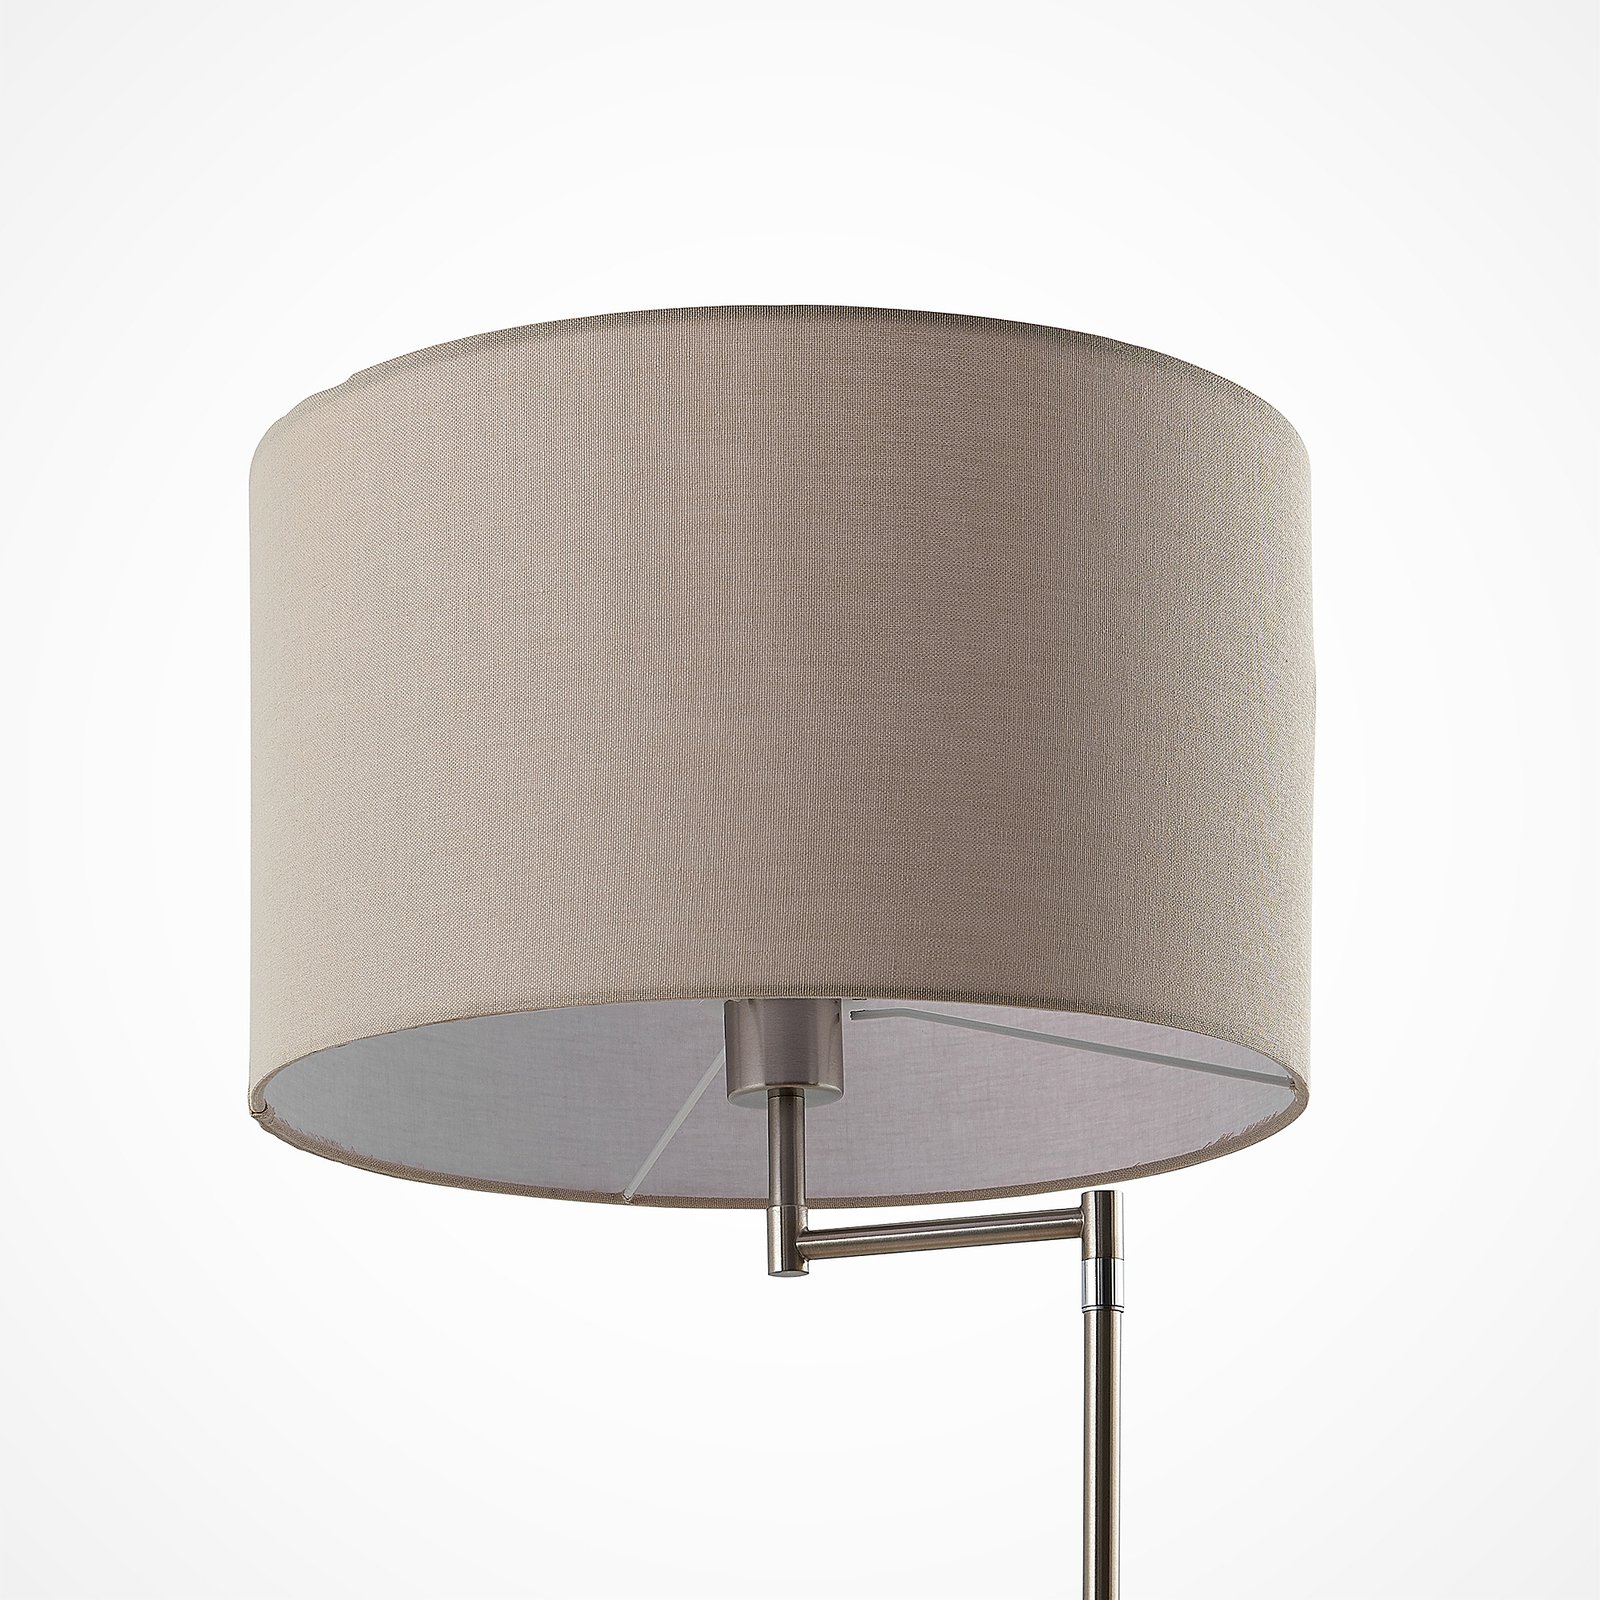 Lindby lampadaire Zinia, couleur nickel, tablette, prise USB